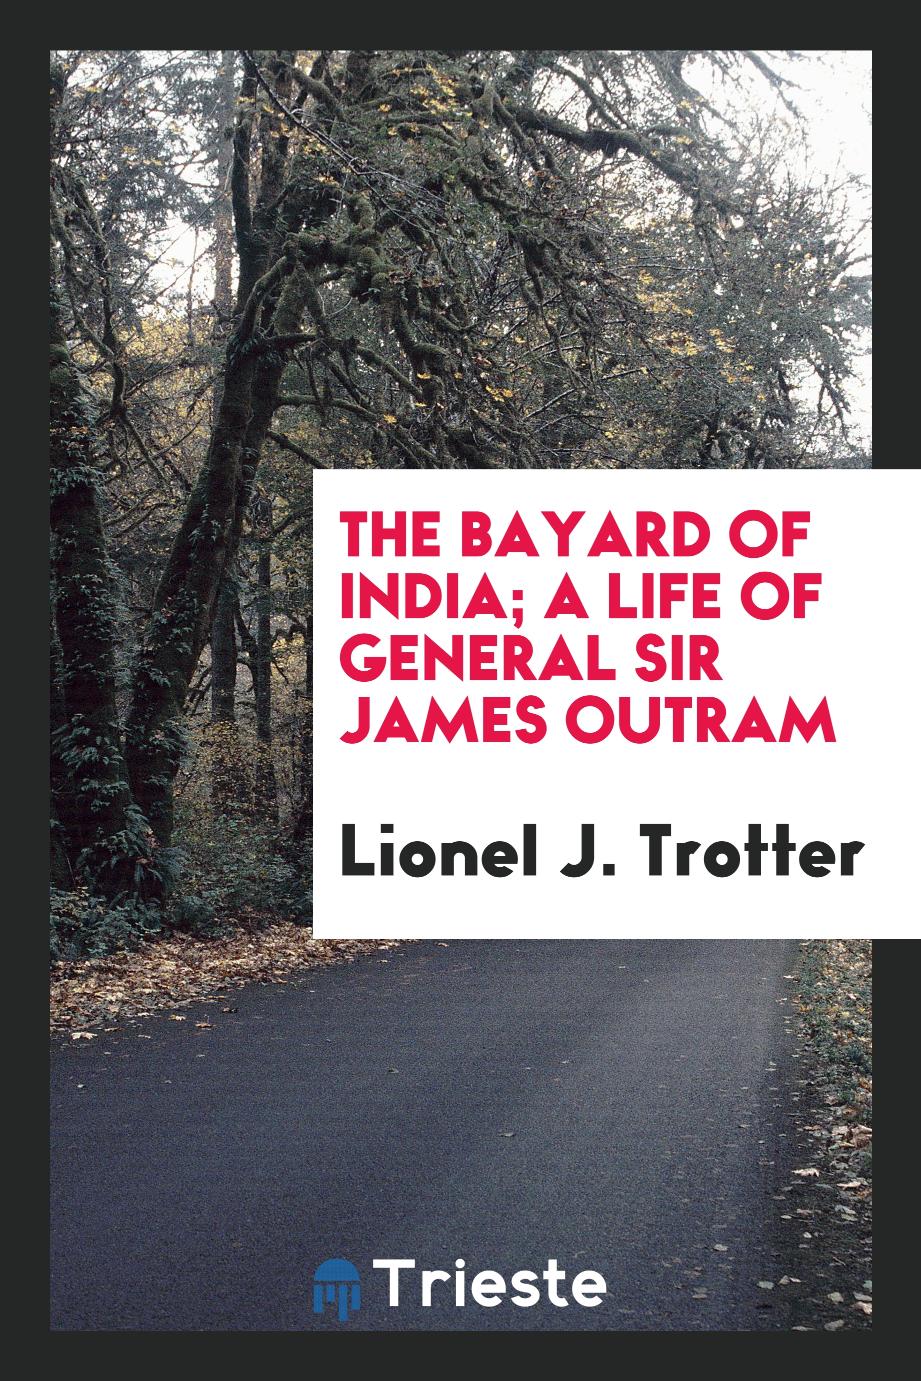 The Bayard of India; a life of General Sir James Outram